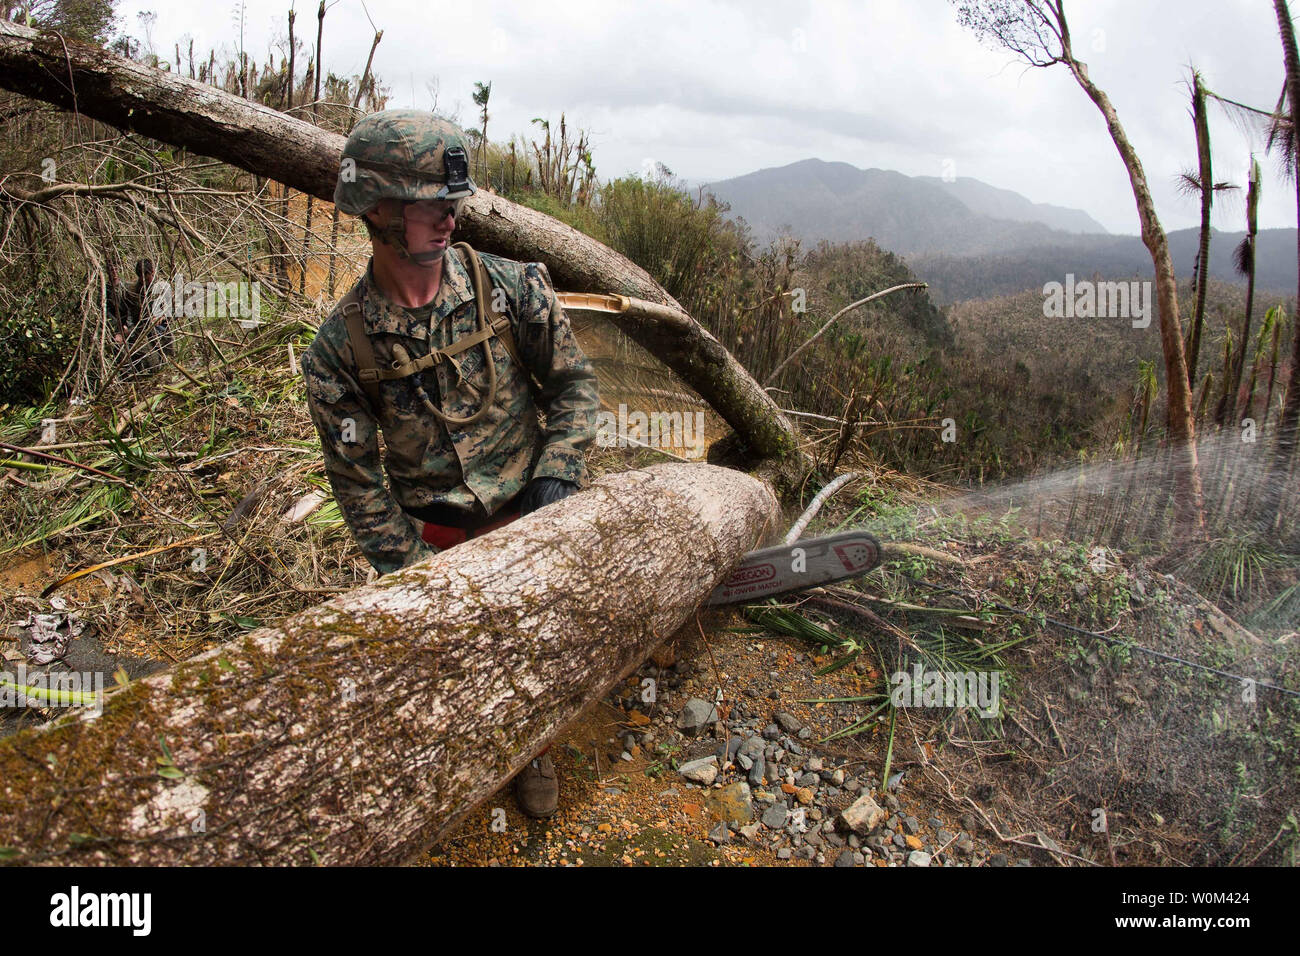 A U.S. Marine with Battalion Landing Team 2nd Battalion, 6th Marine Regiment, 26th Marine Expeditionary Unit (MEU), uses a chainsaw to cut a tree blocking a road as part of Hurricane Maria relief efforts in Ceiba, Puerto Rico, on September 27, 2017. The 26th MEU is supporting the Federal Emergency Management Agency, the lead federal agency, and local authorities in Puerto Rico with the combined goal of protecting the lives and safety of those in affected areas. Photo by Lance Cpl. Alexis Schneider/U.S. Marine Corps/UPI Stock Photo